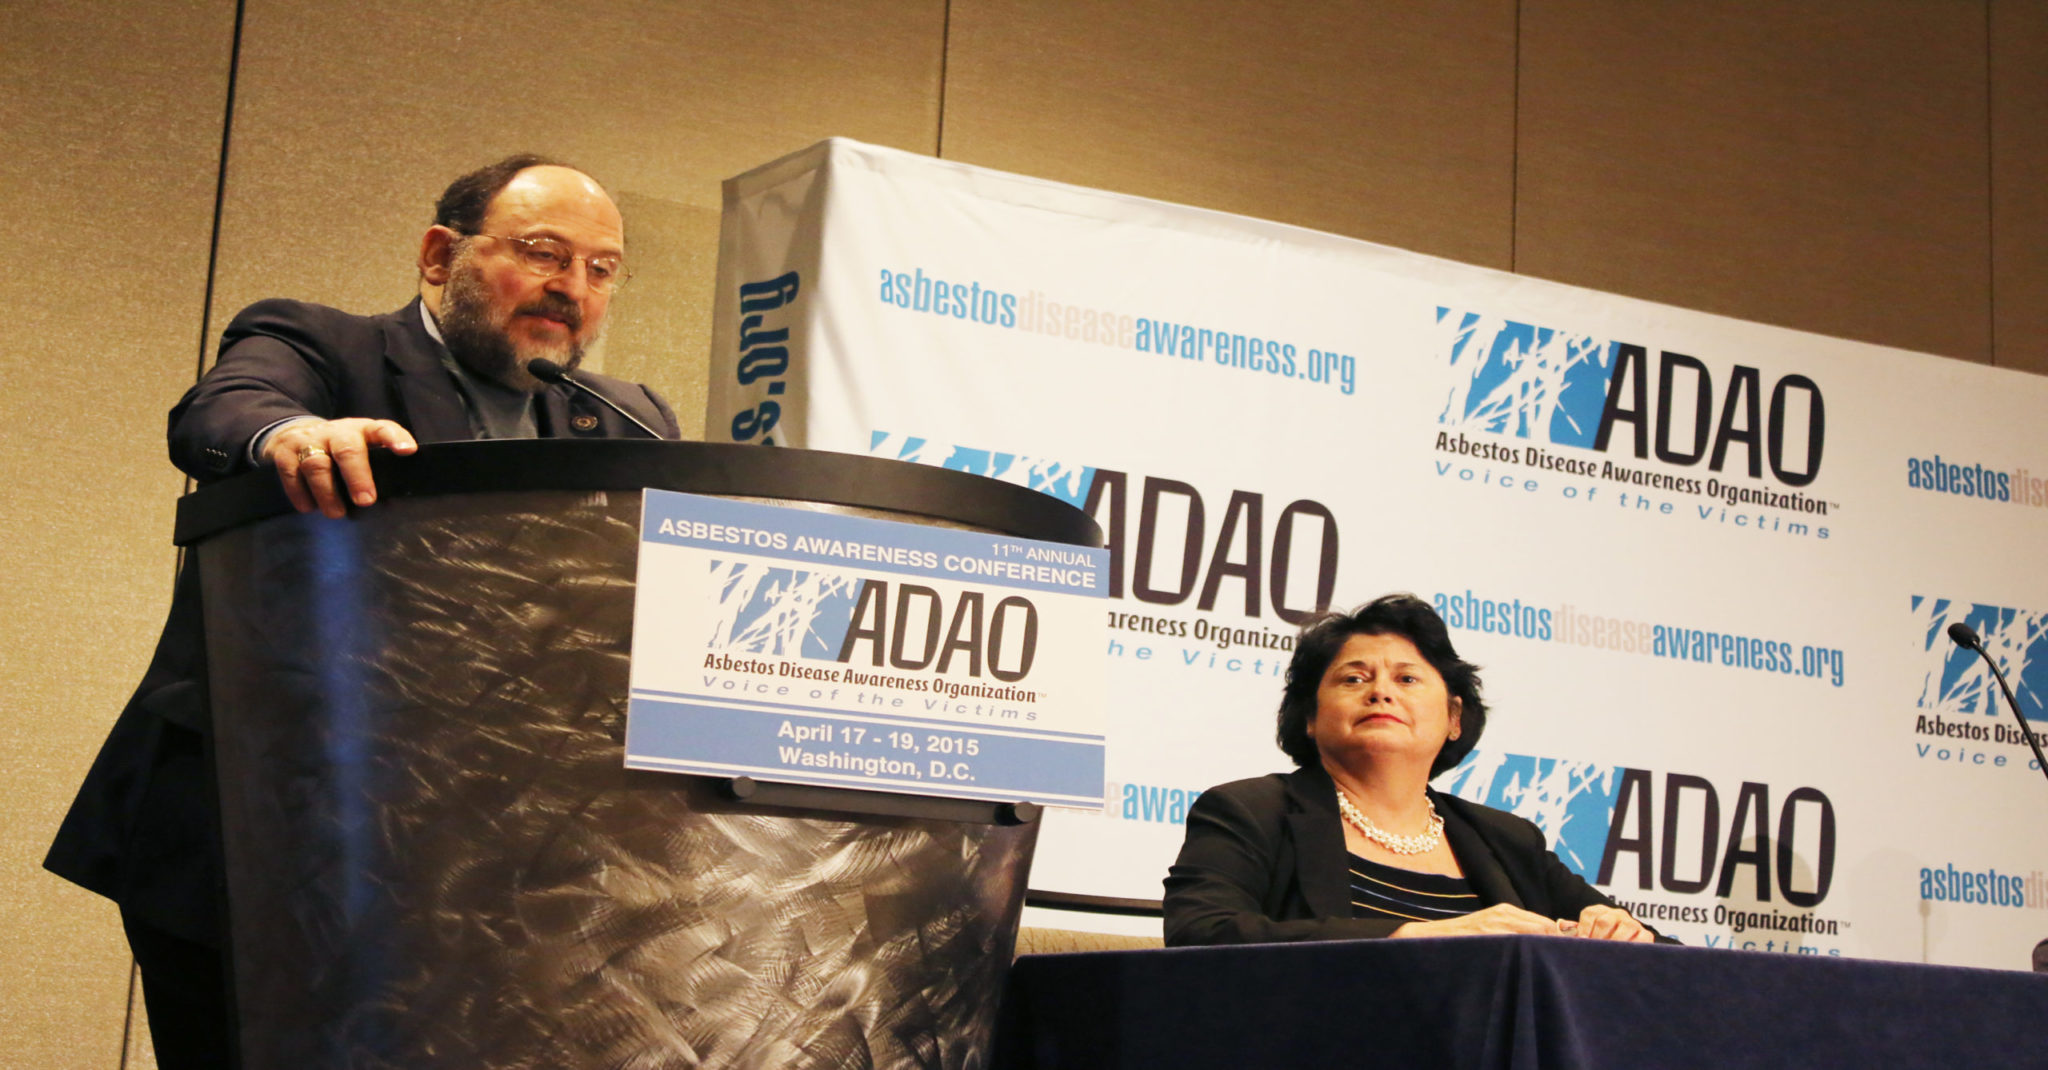 Dr. Arthur Frank from the ADAO speaks on tips for mesothelioma patients during the COVID-19 pandemic